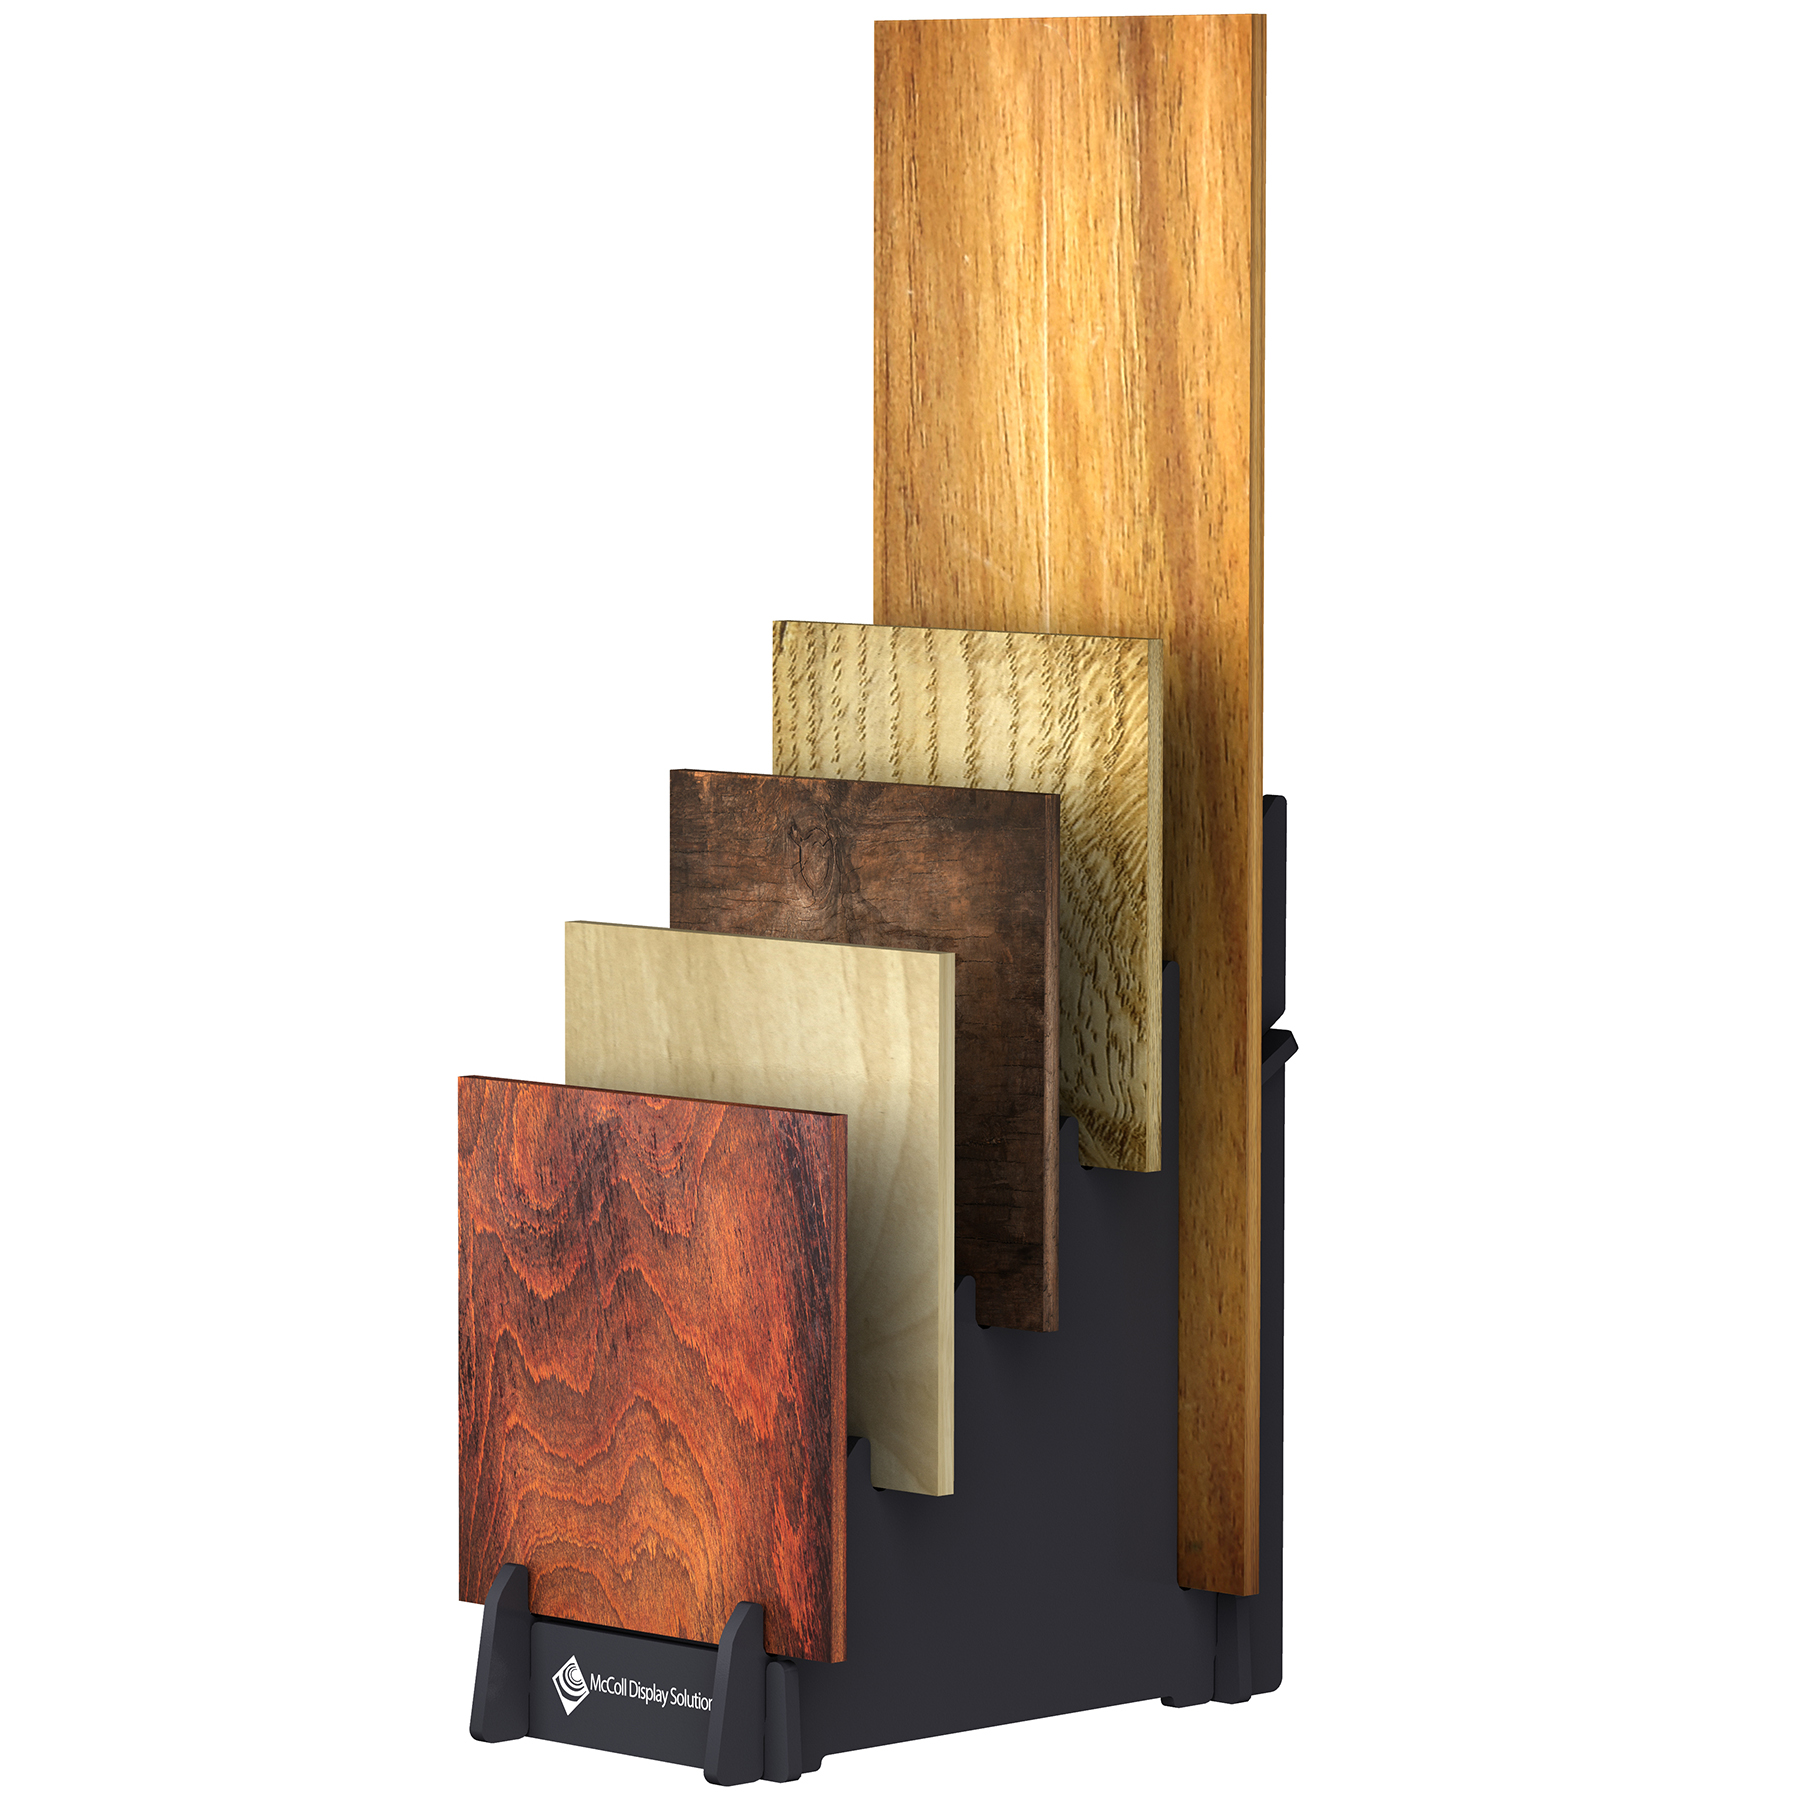 CD46 Unique Waterfall Cascade Rack for Large Sample and more Hardwood Laminate Planks Showroom Display